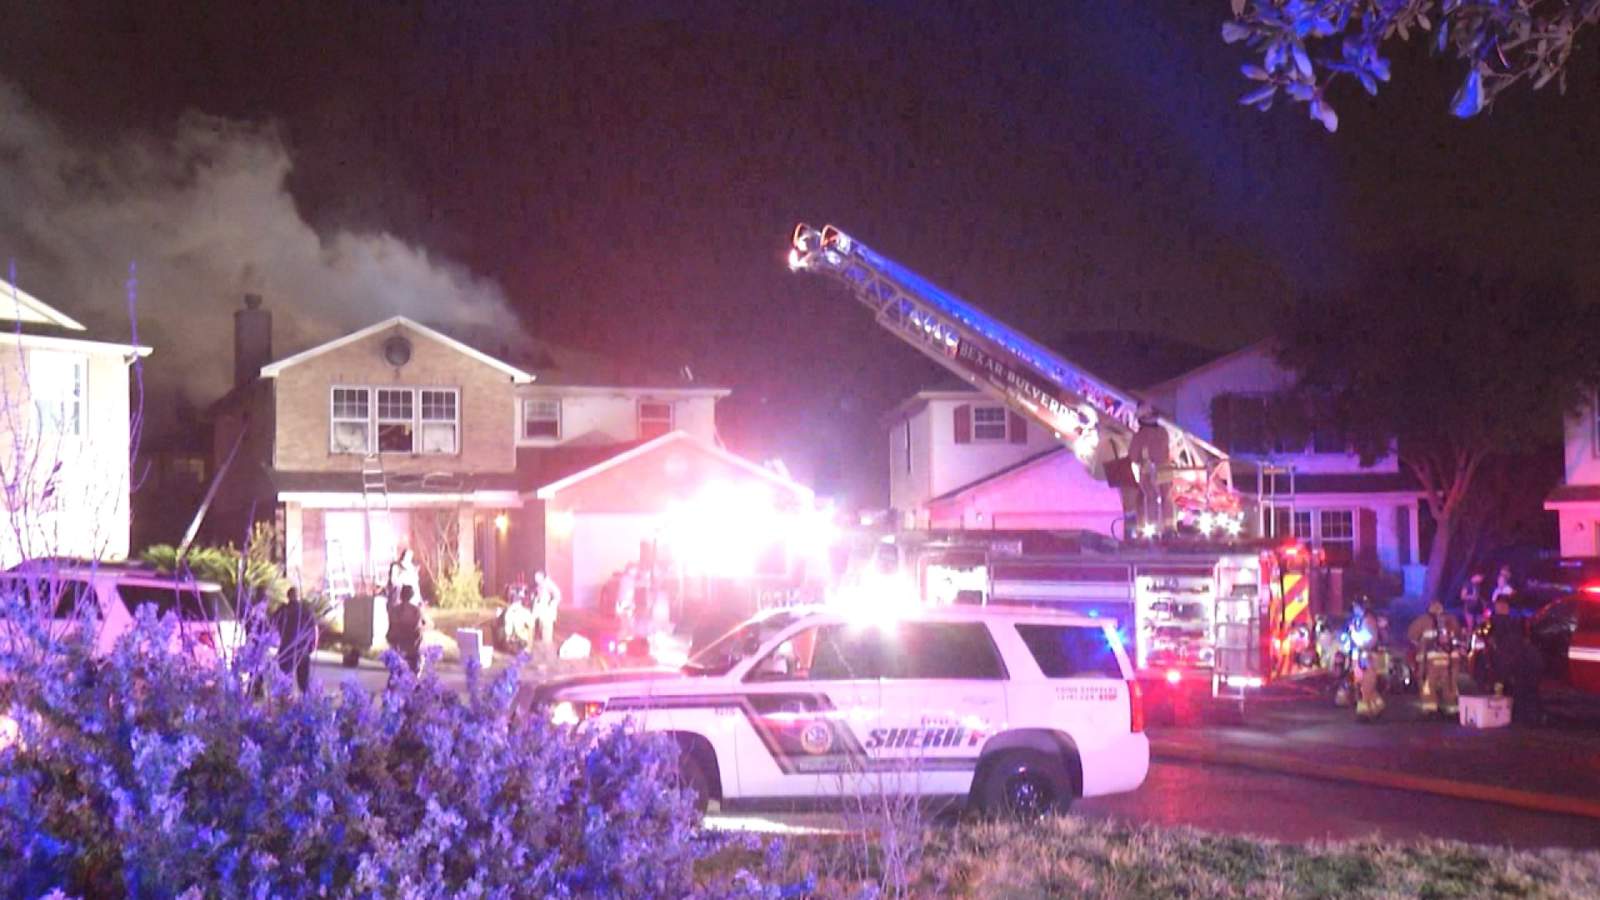 Fire forces family to evacuate home, causes $185K in damage, fire officials say